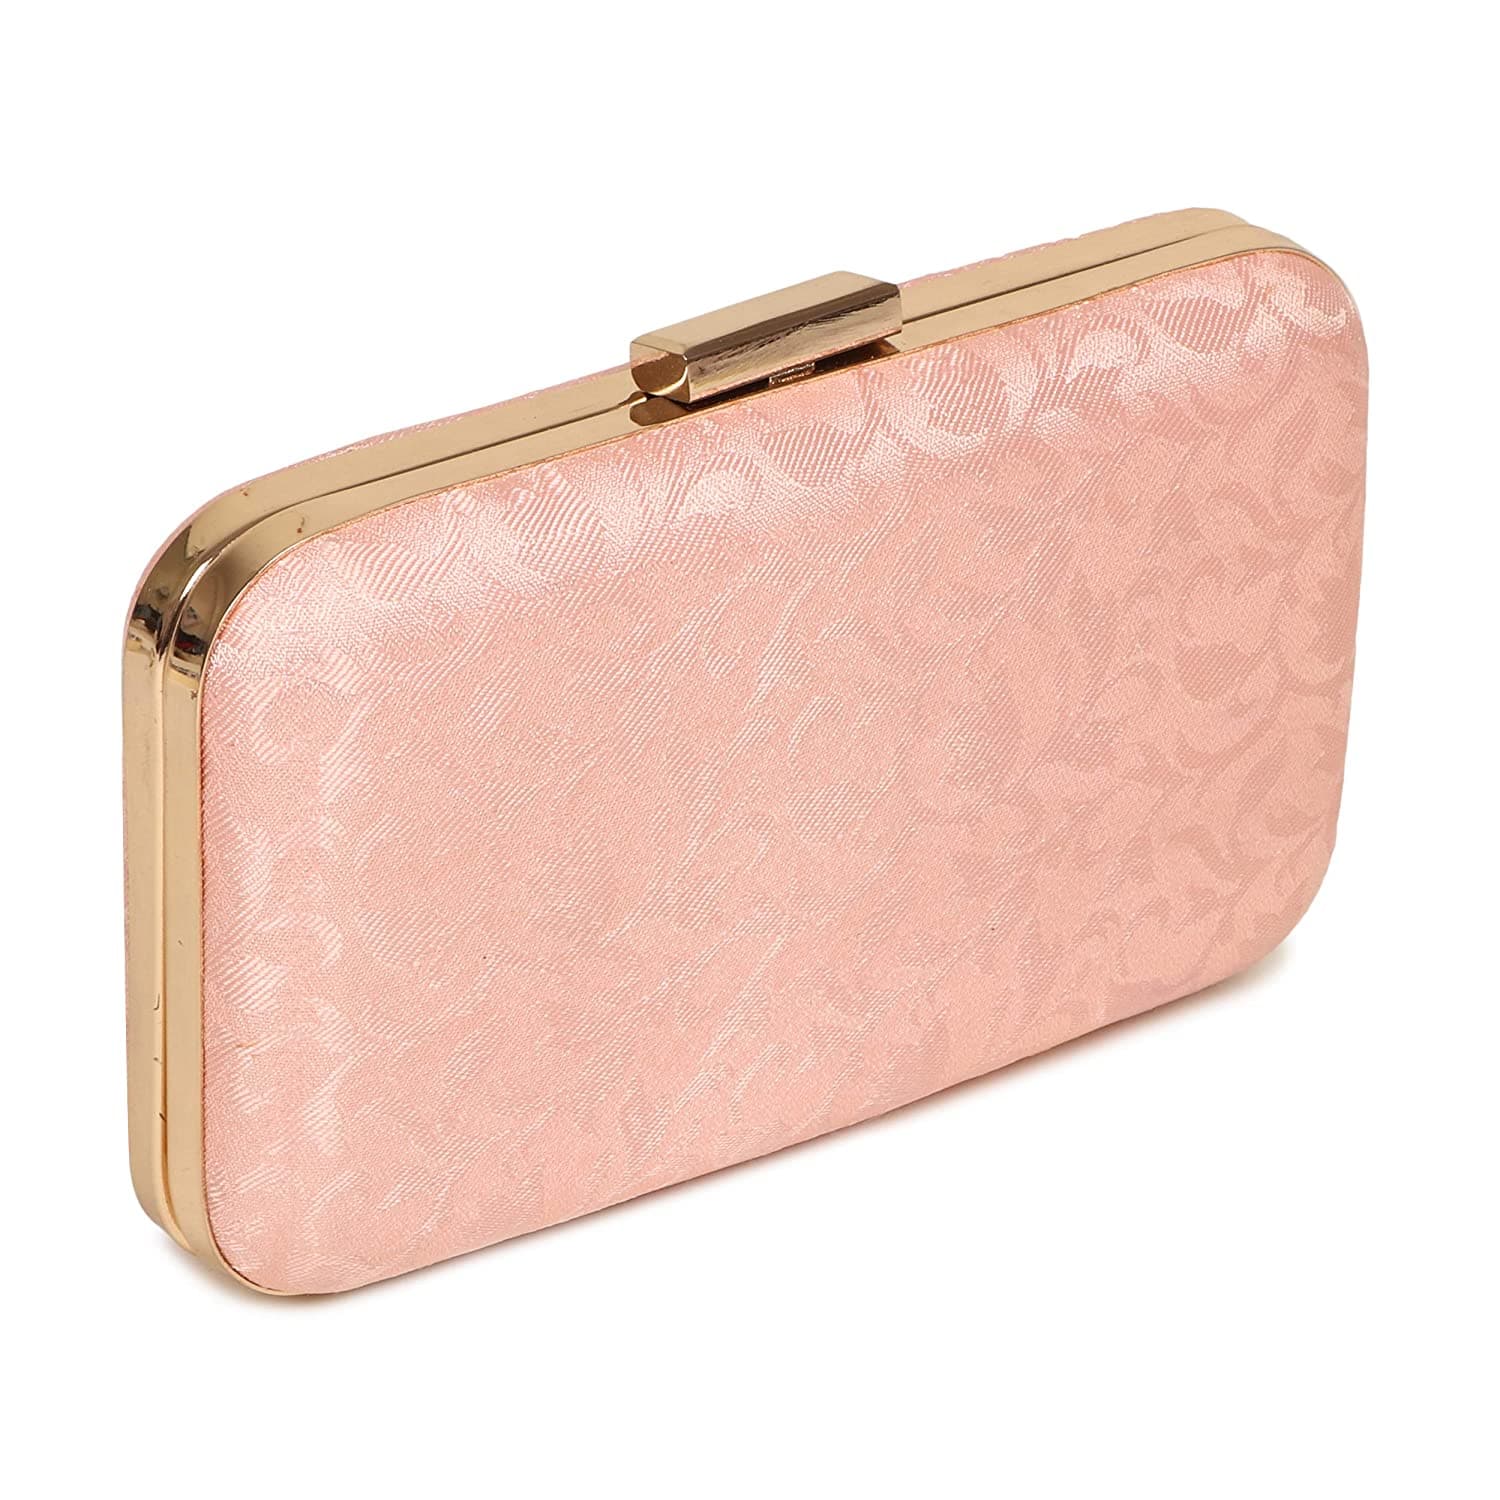 Women's Pink Clutches & Pouches | Nordstrom